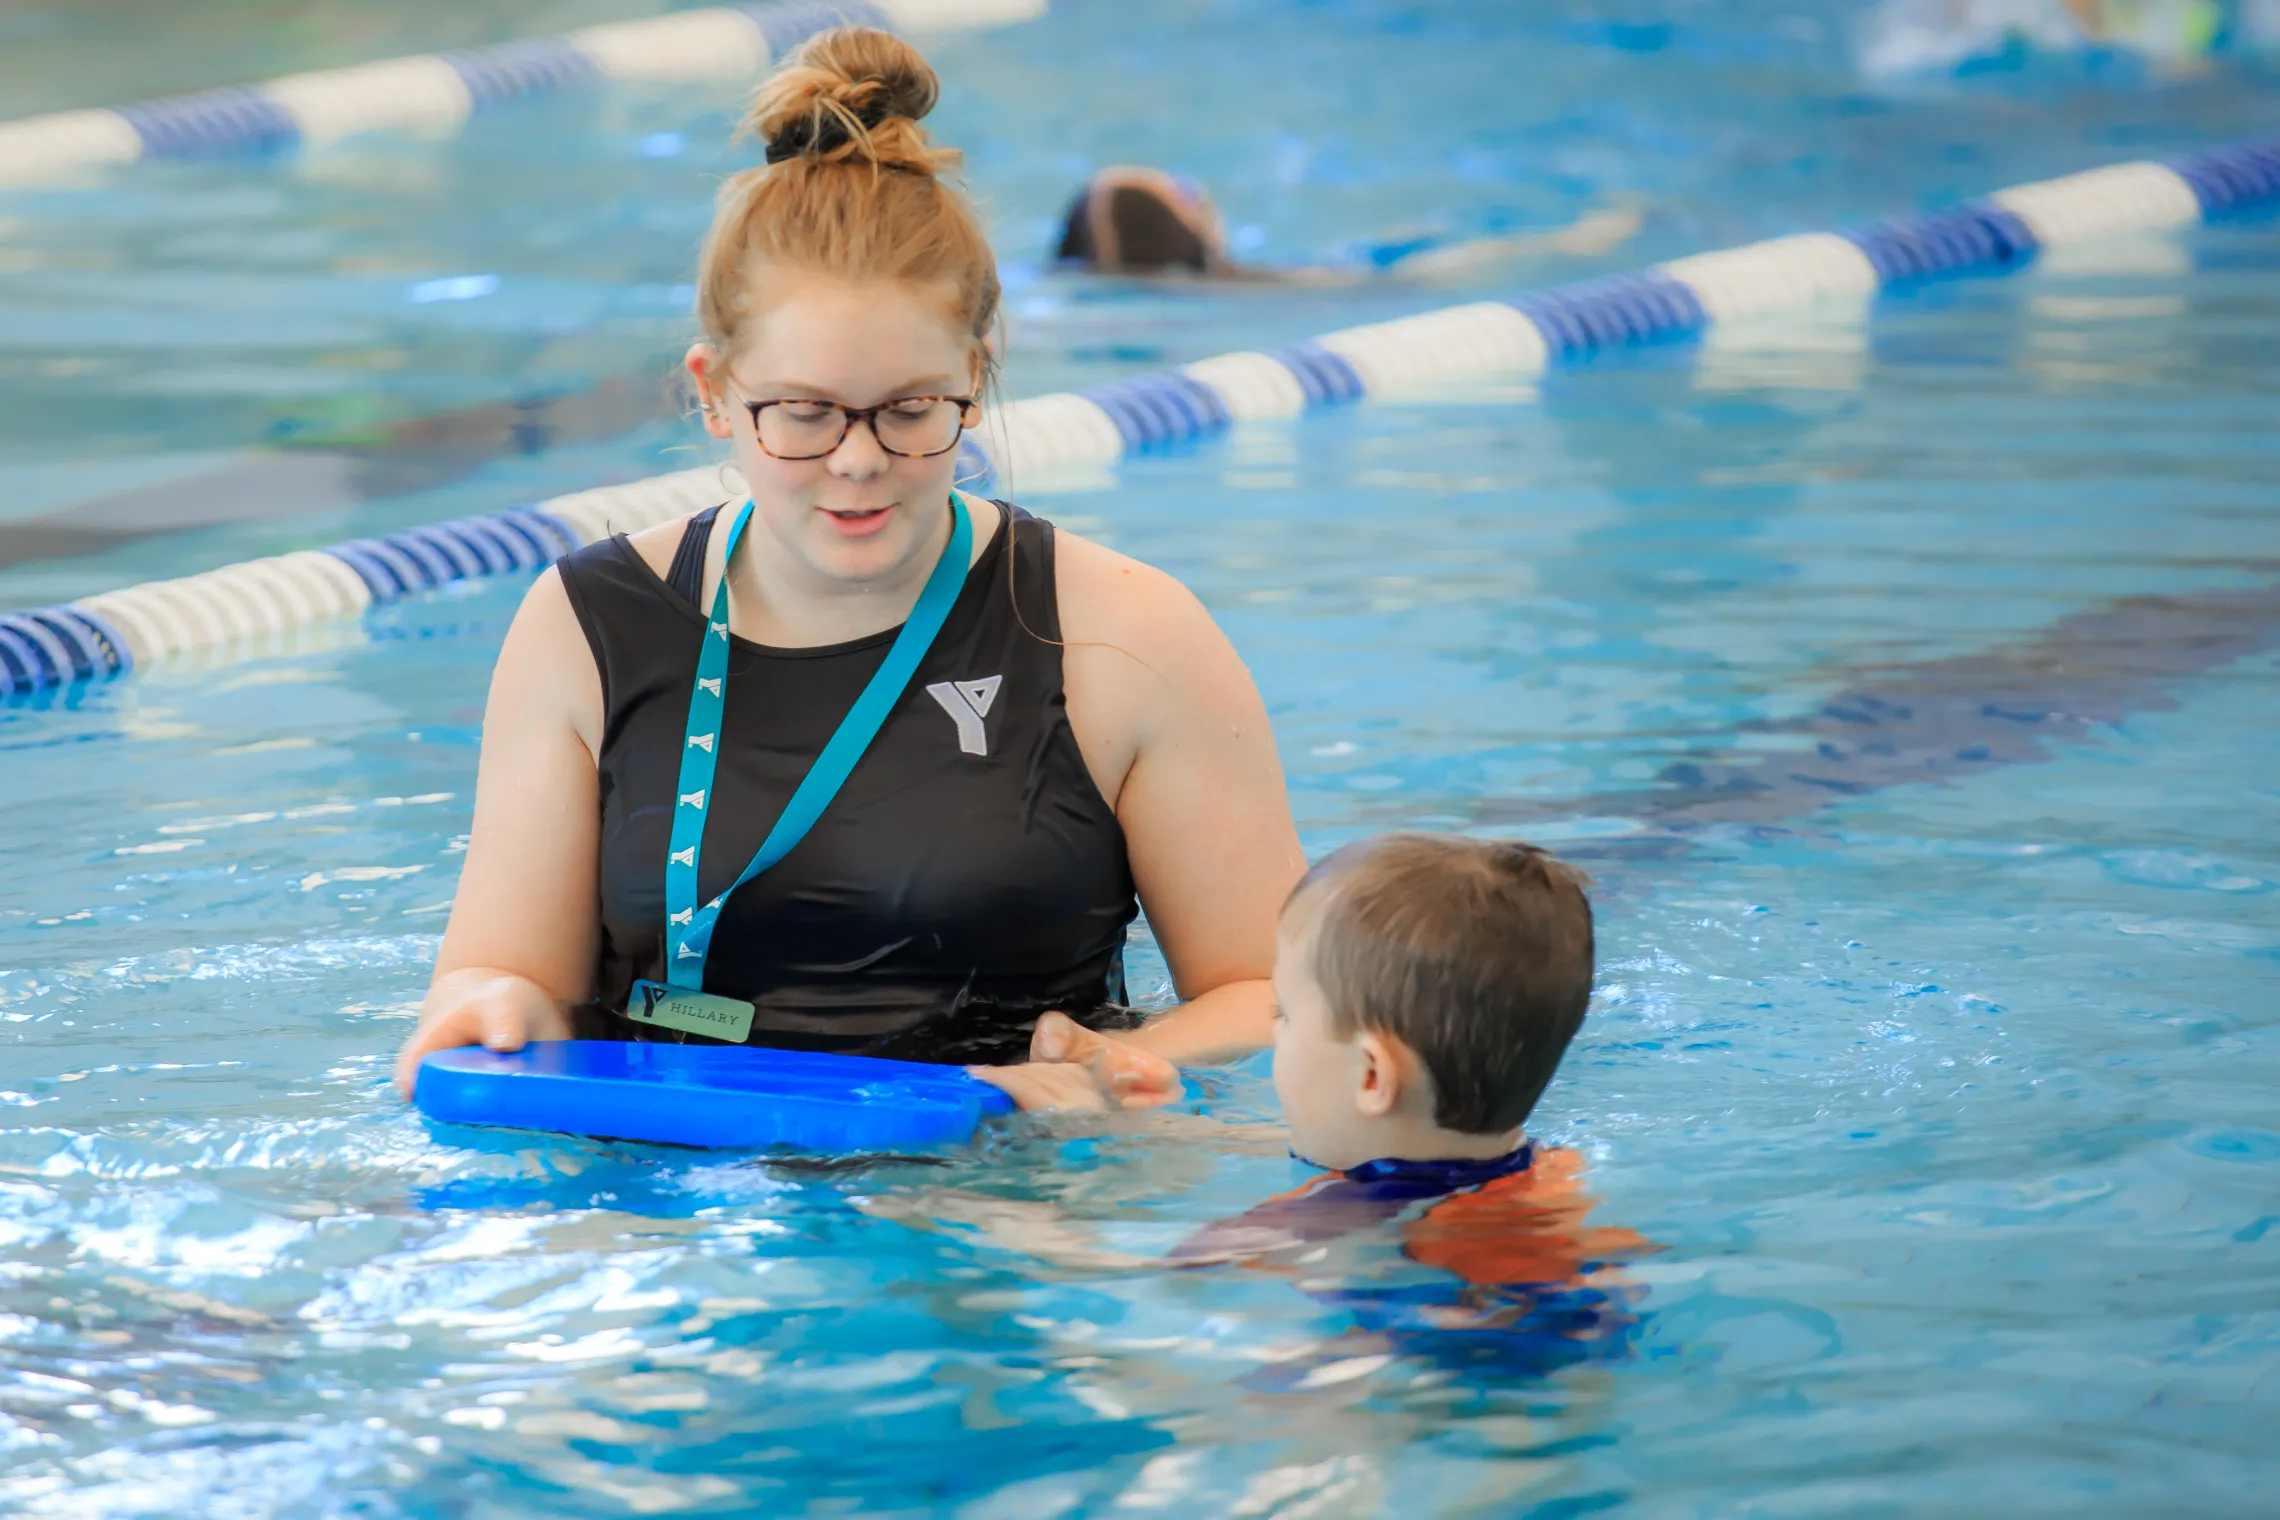 A YMCA lifeguard teaches a boy how to hold a flutter board in a Y facility pool.